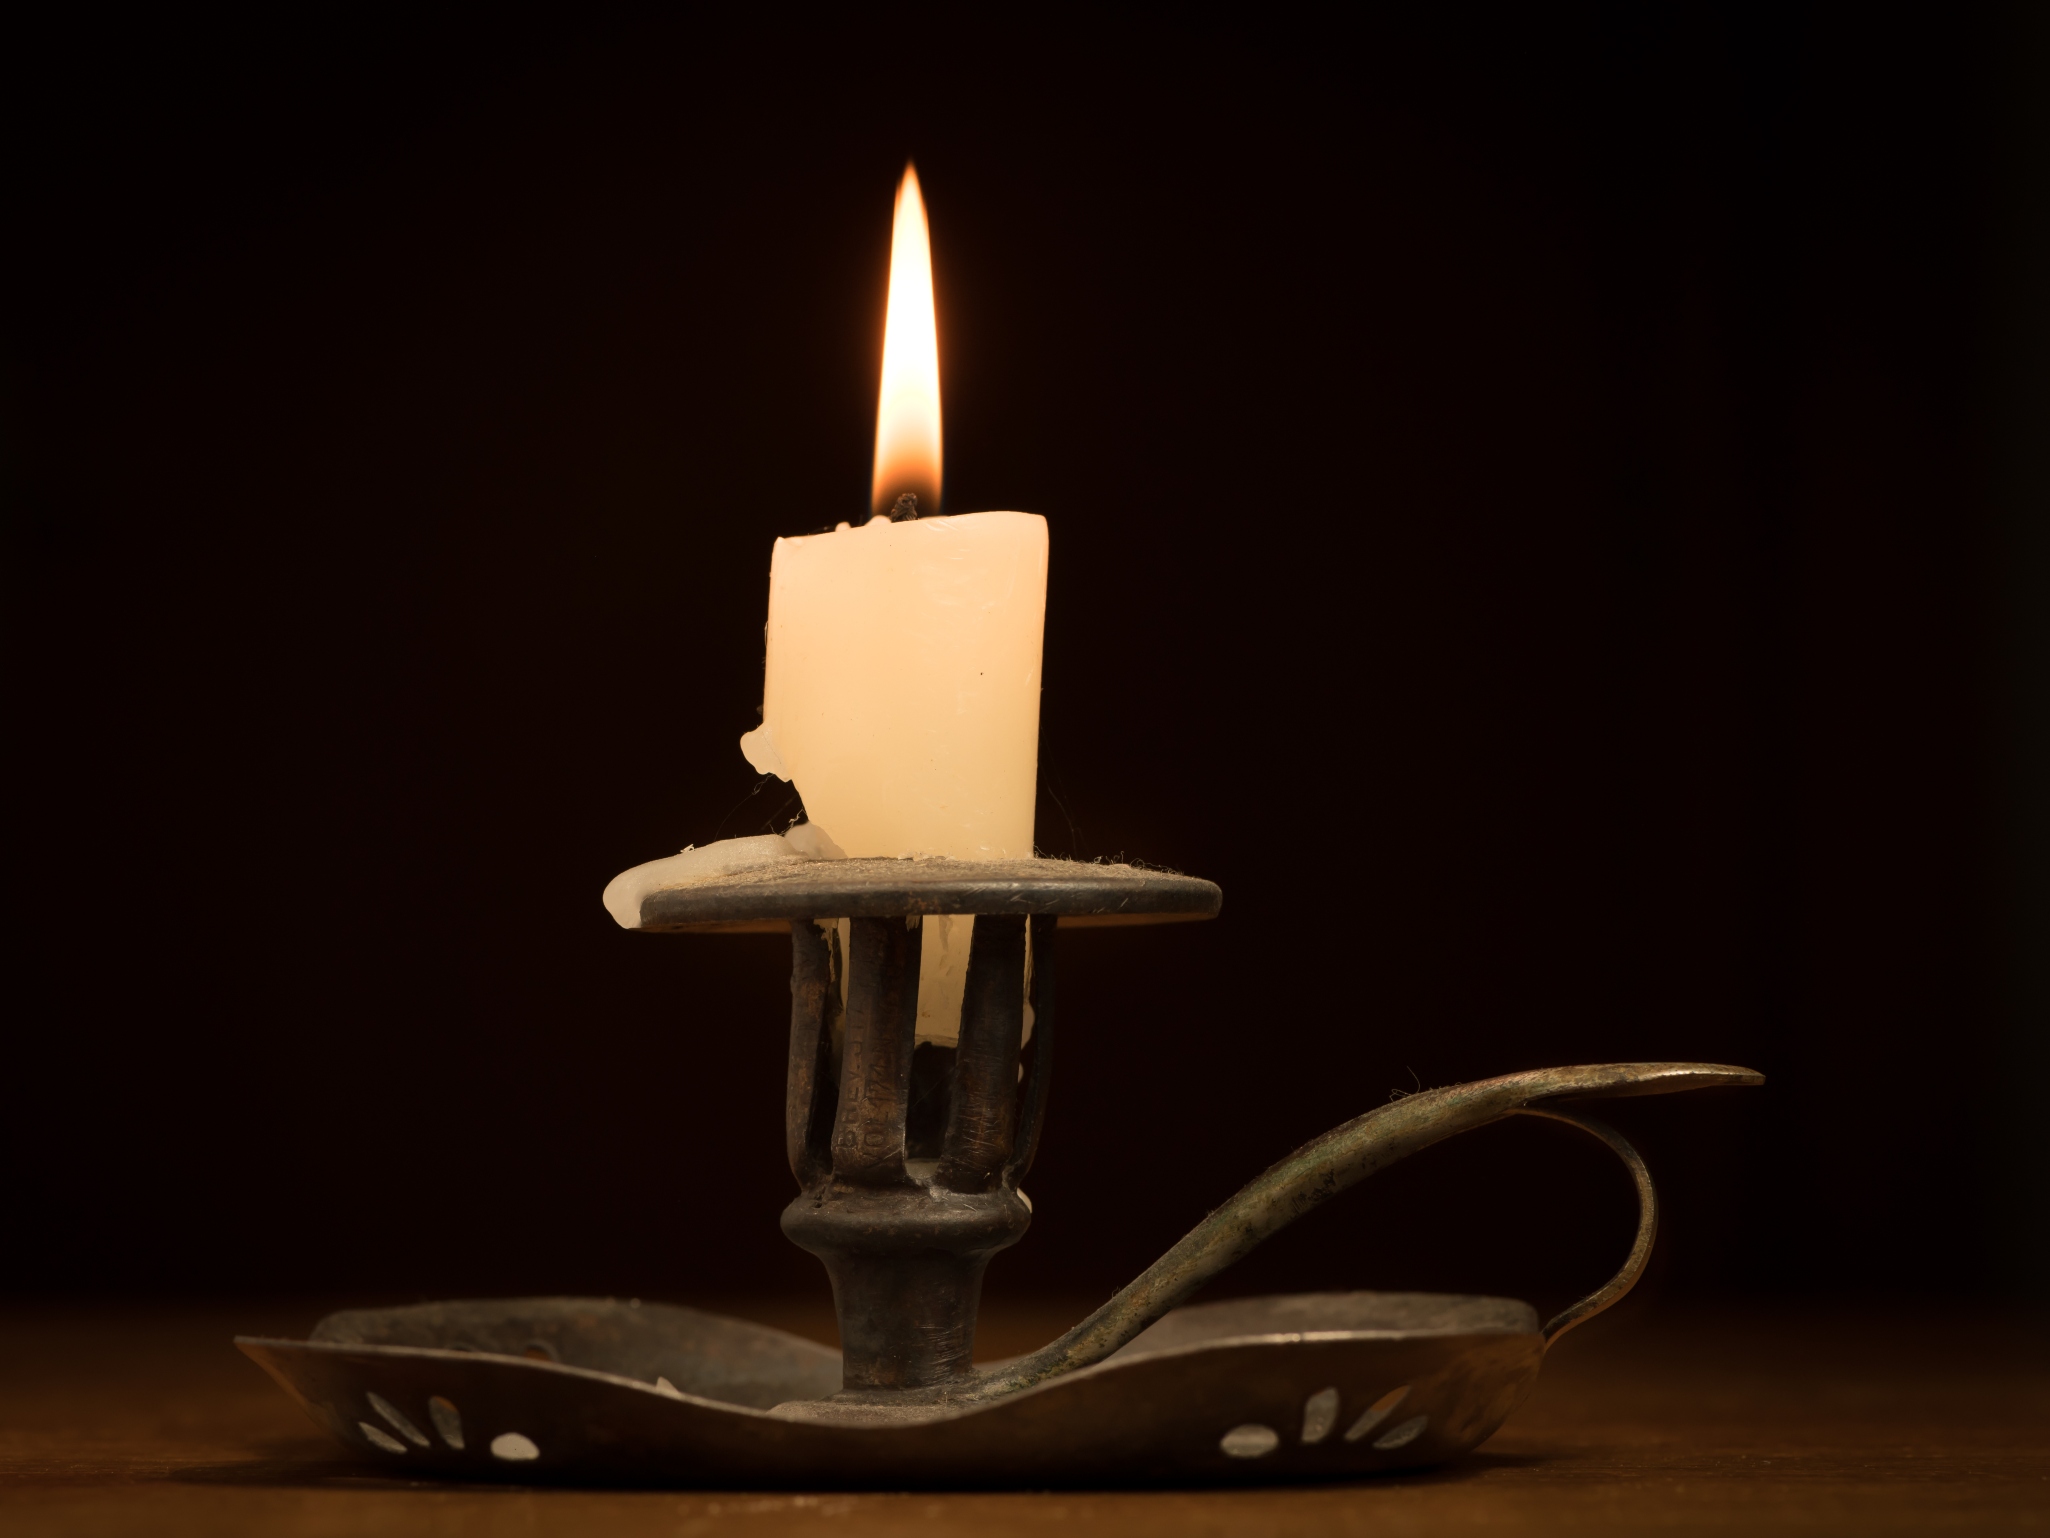 Historic candle holder with melted lit candle